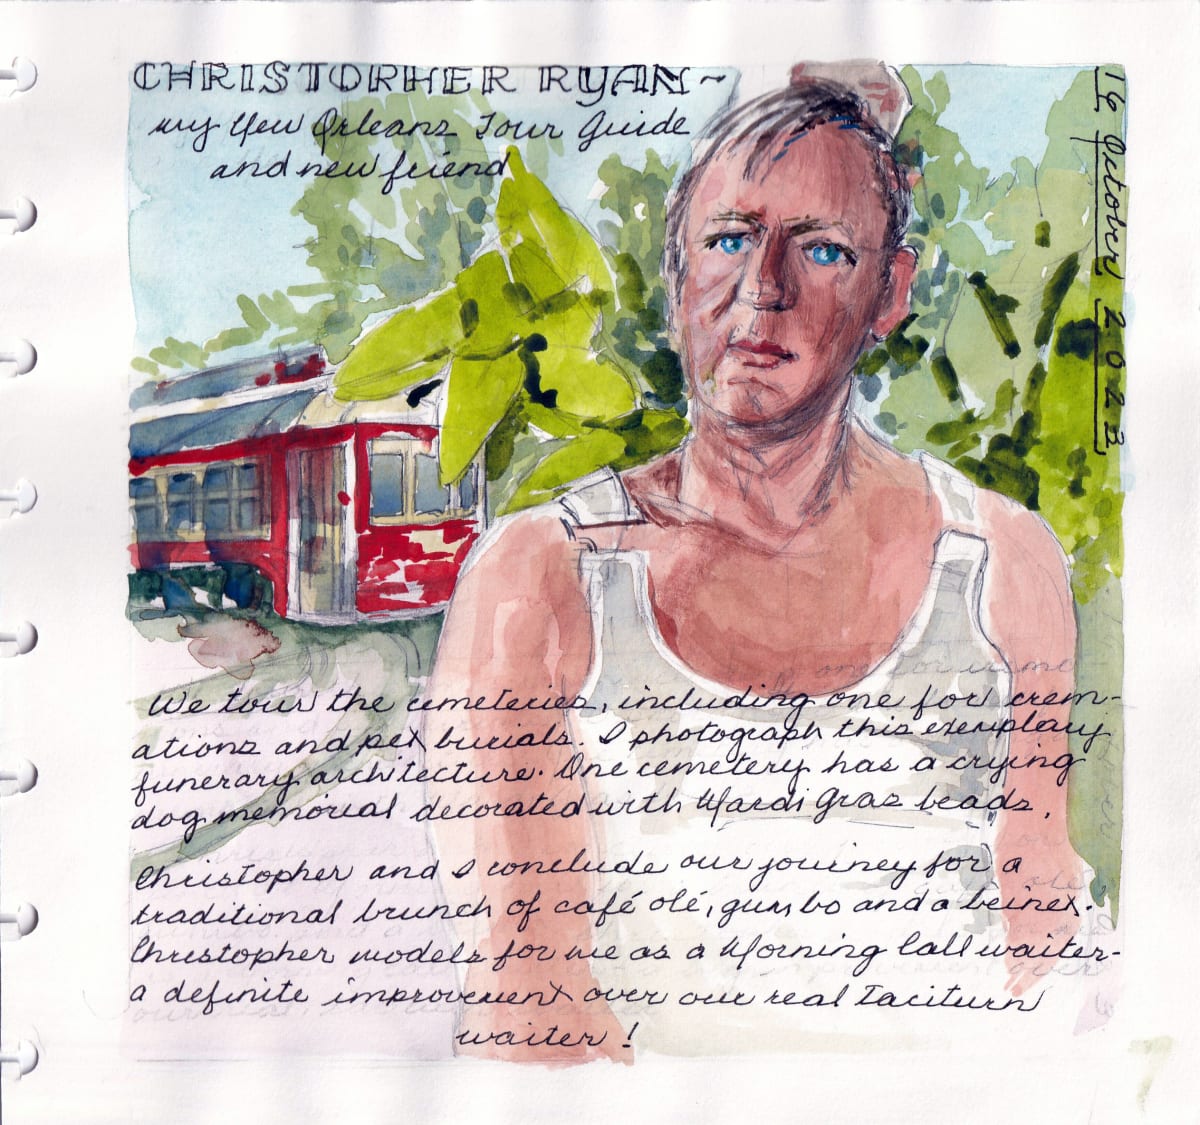 Journey Daybook Page by Margaret Pulis Herrick (Peggy)  Image: Christopher Ryan models during a day in New Orleans